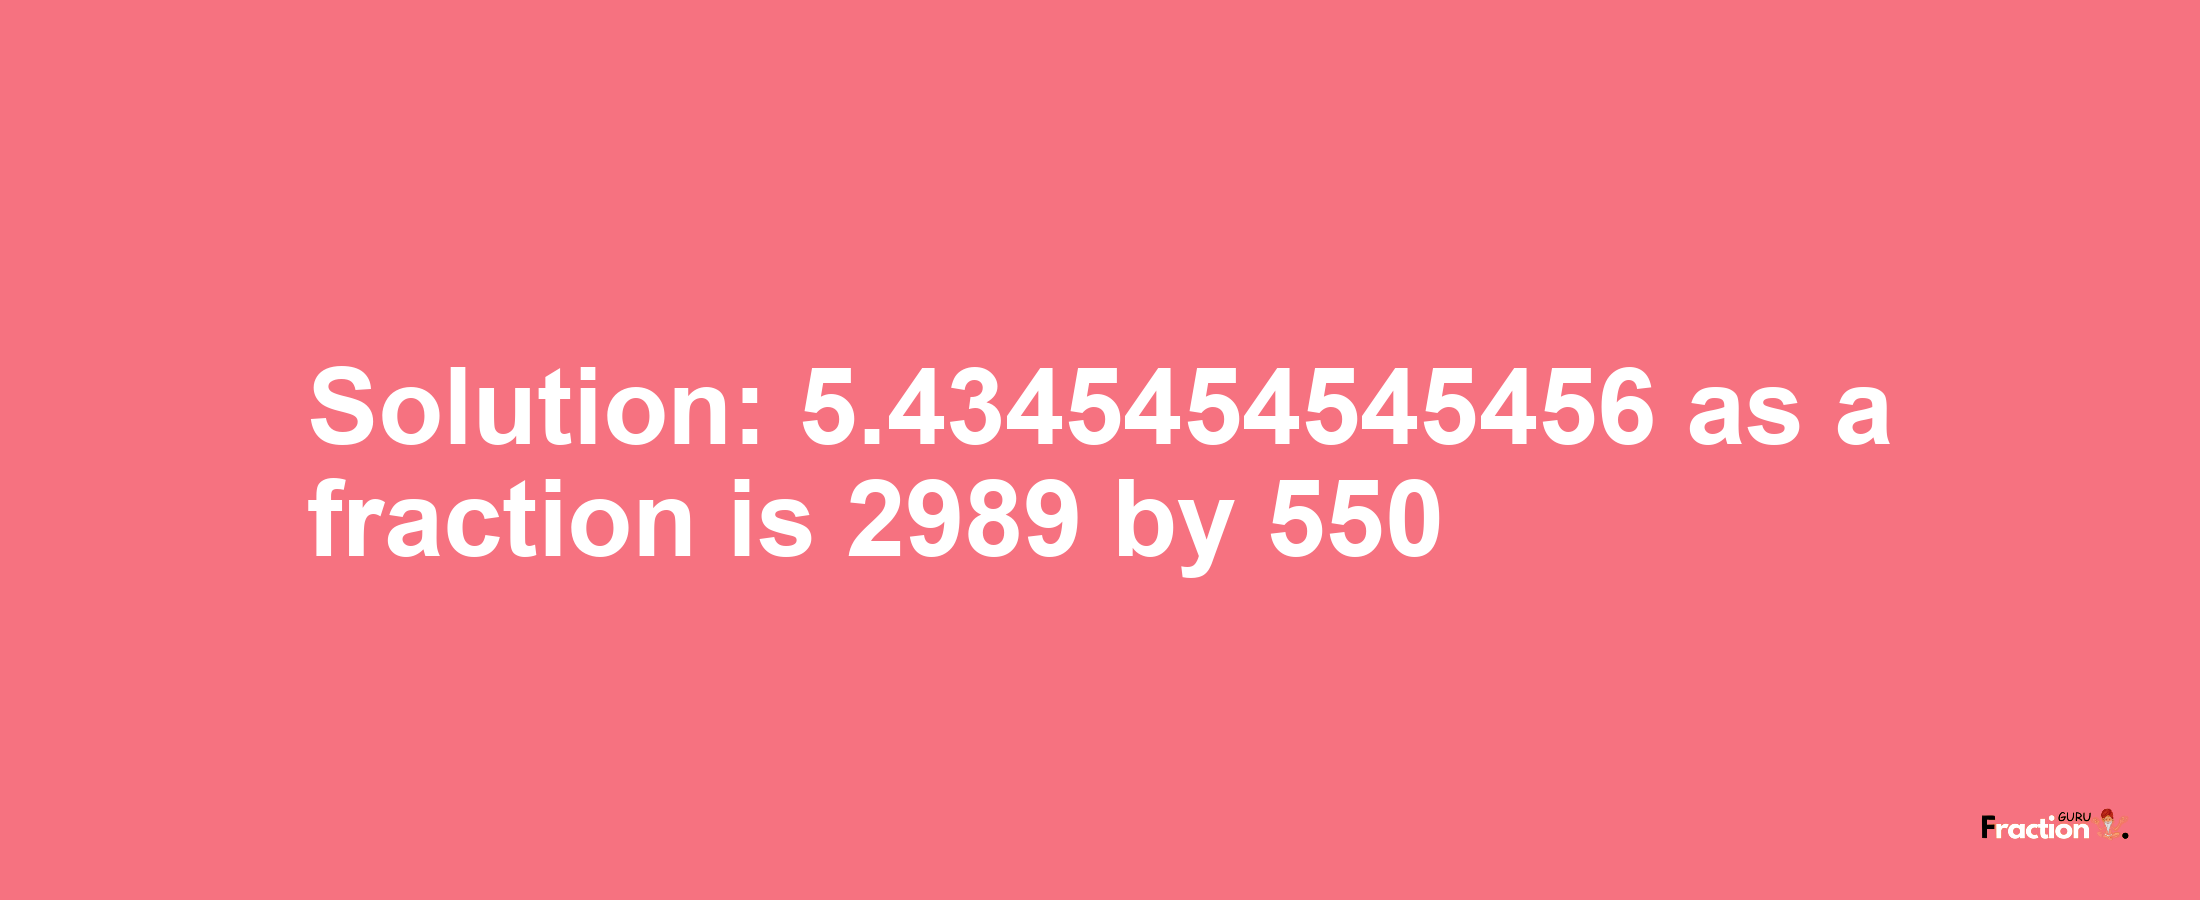 Solution:5.4345454545456 as a fraction is 2989/550